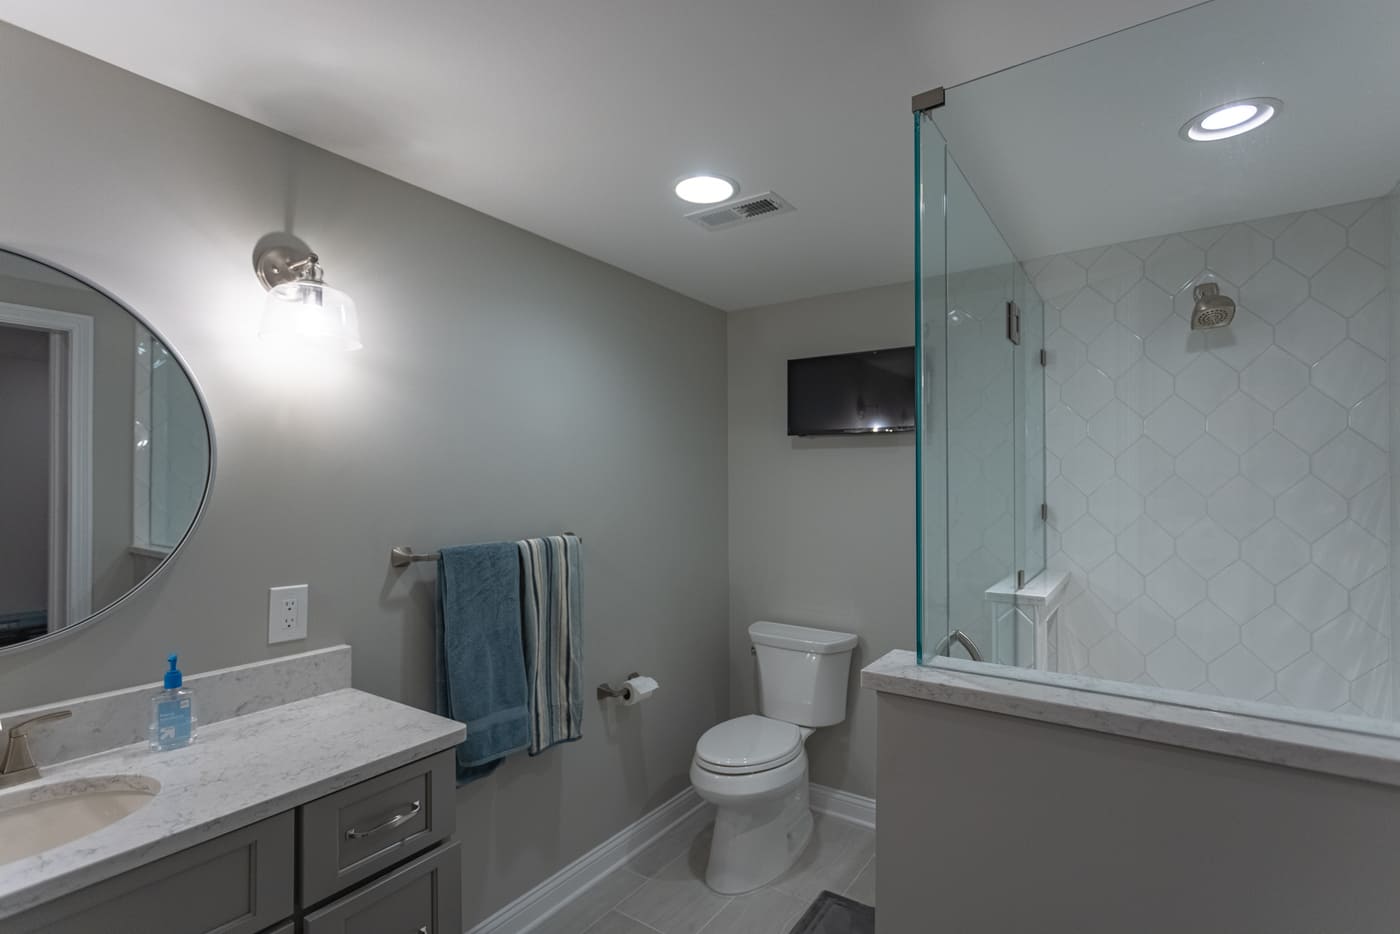 Basement bathroom renovation with walk-in shower and recessed lighting in Ross County, OH